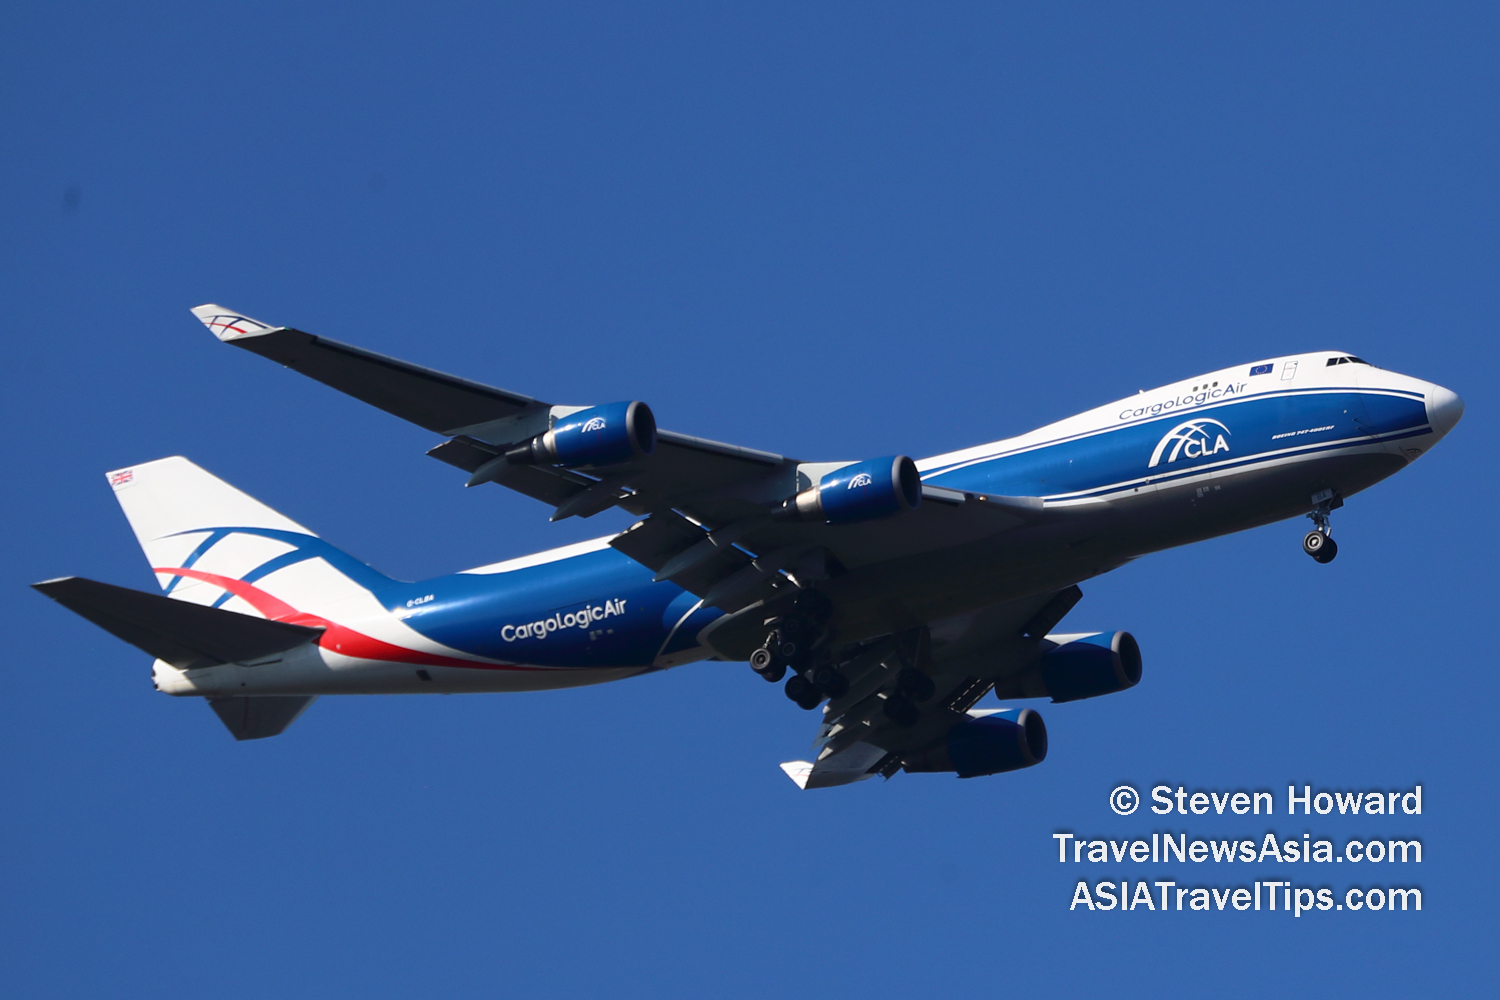 CargoLogicAir Boeing 747-400ERF reg: G-CLBA. Picture by Steven Howard of TravelNewsAsia.com Click to enlarge.